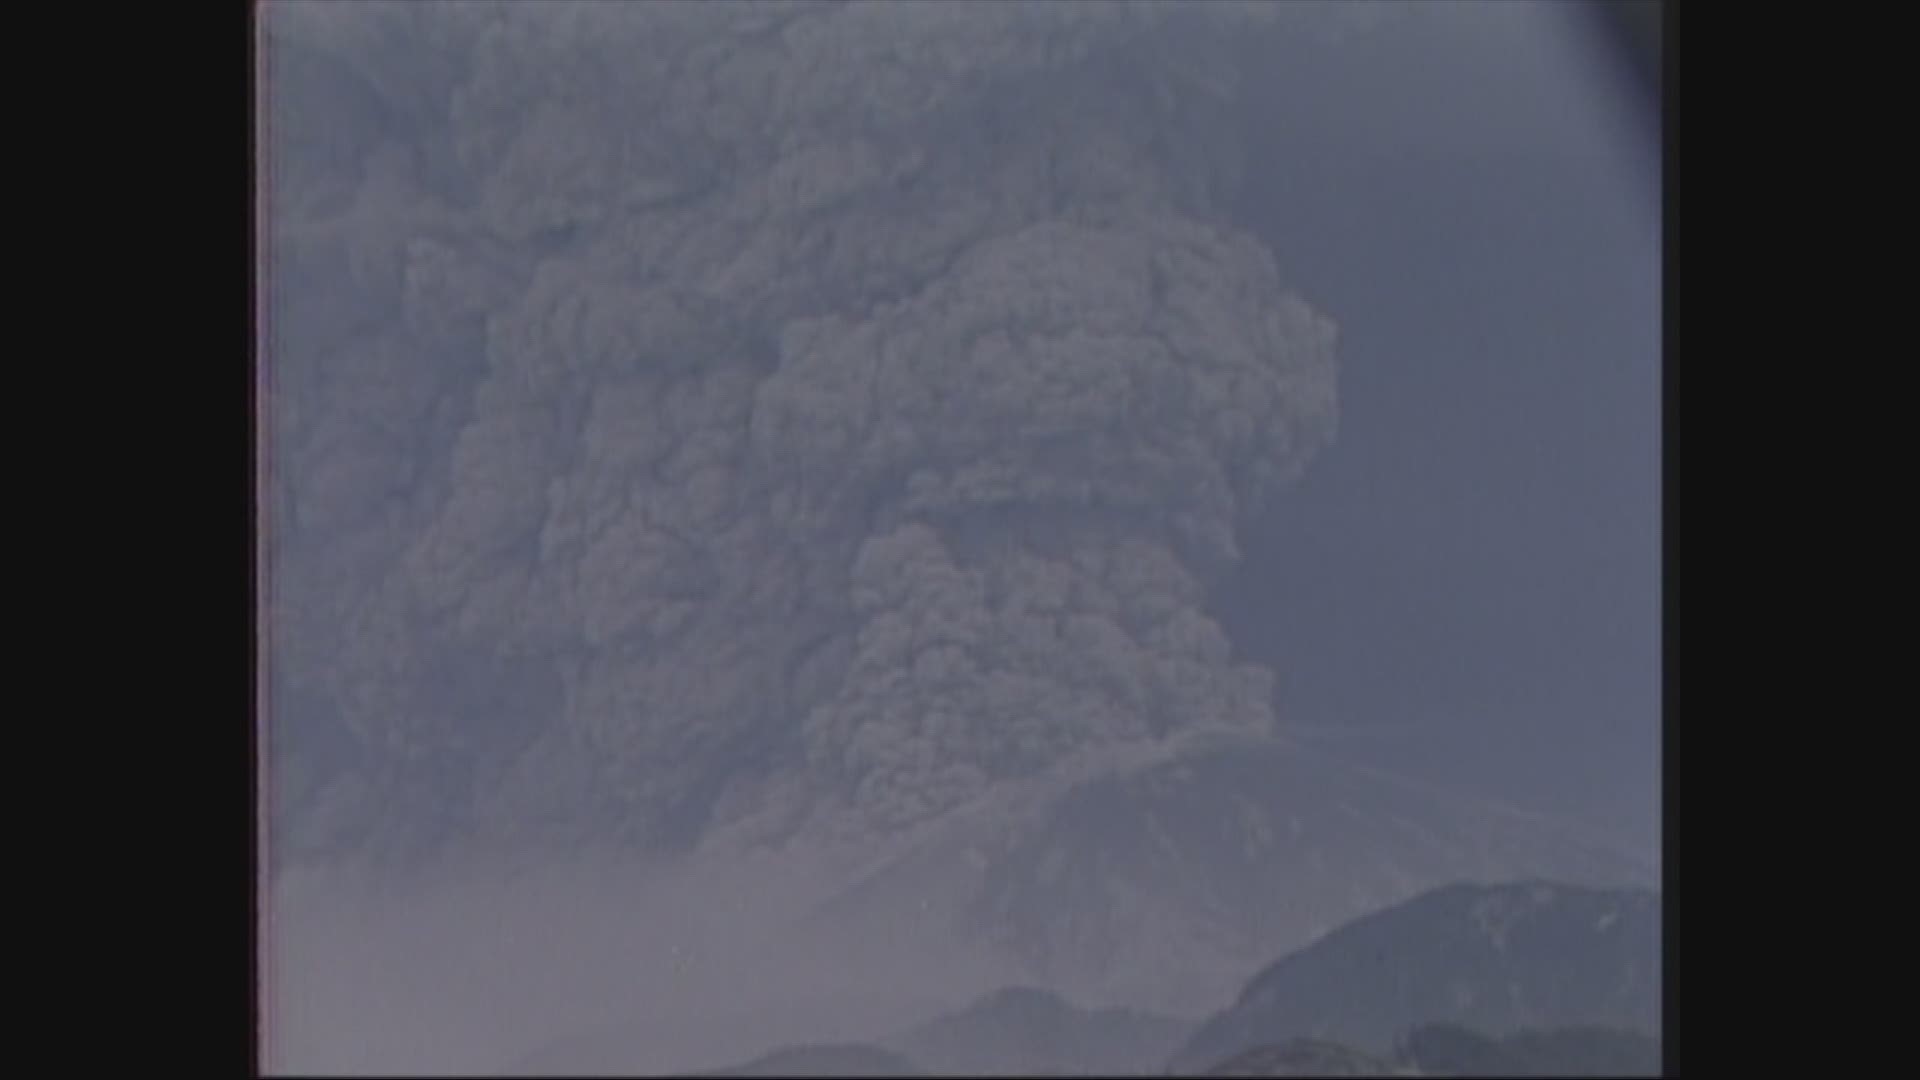 37th anniversary of Mount St. Helens eruption